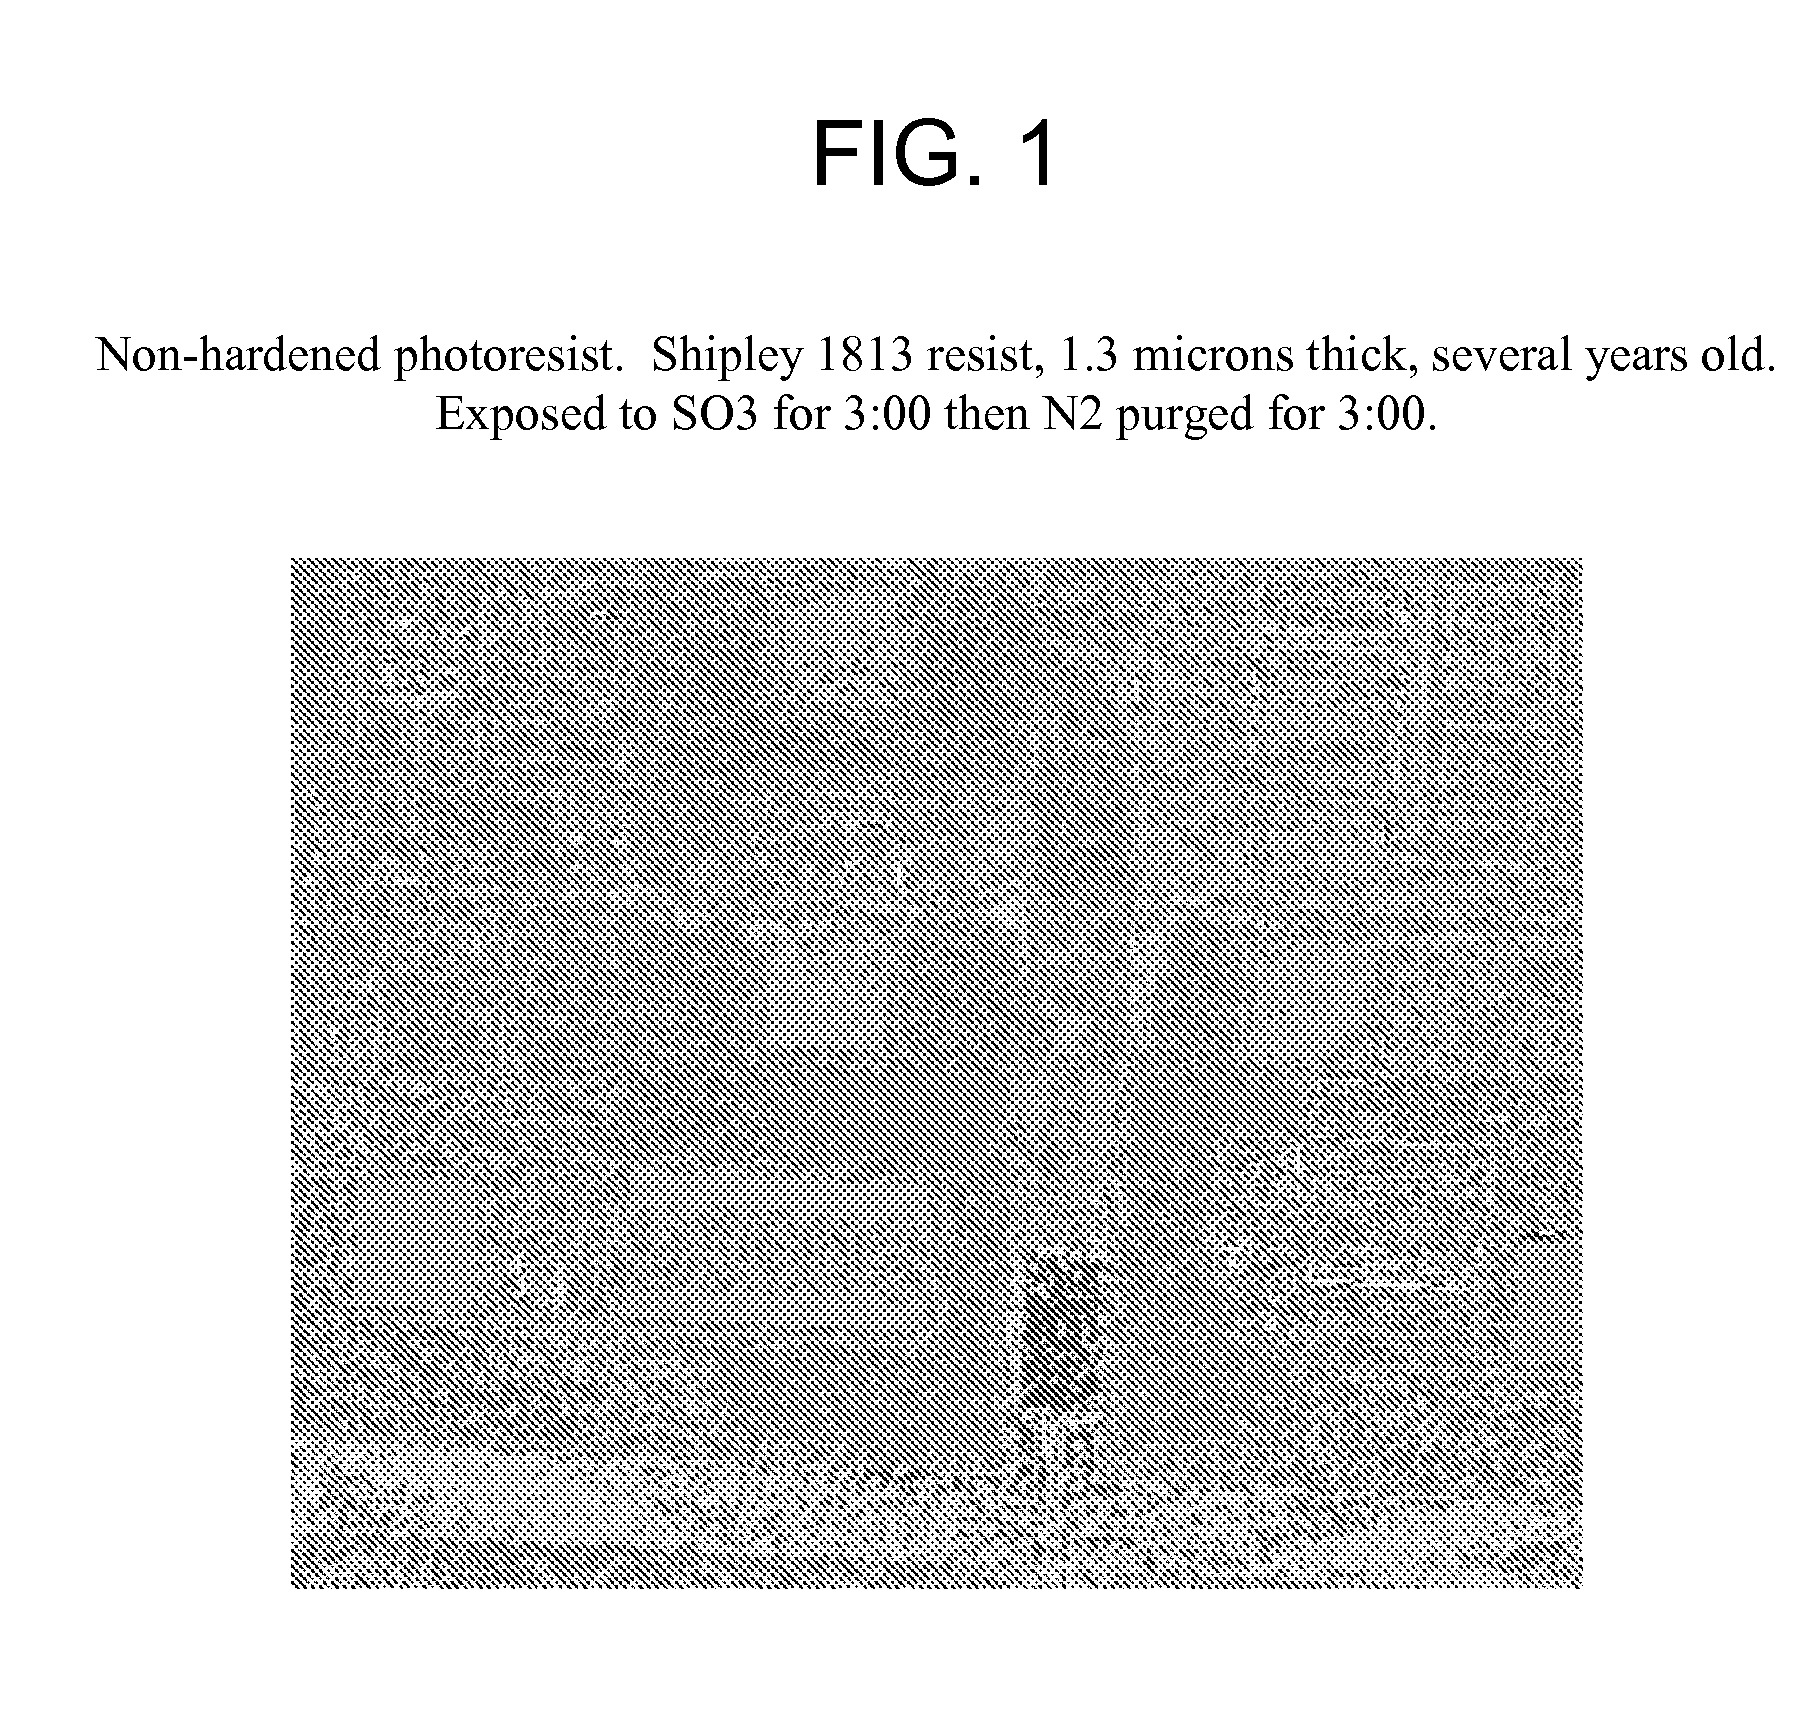 Methods for removing photoresist